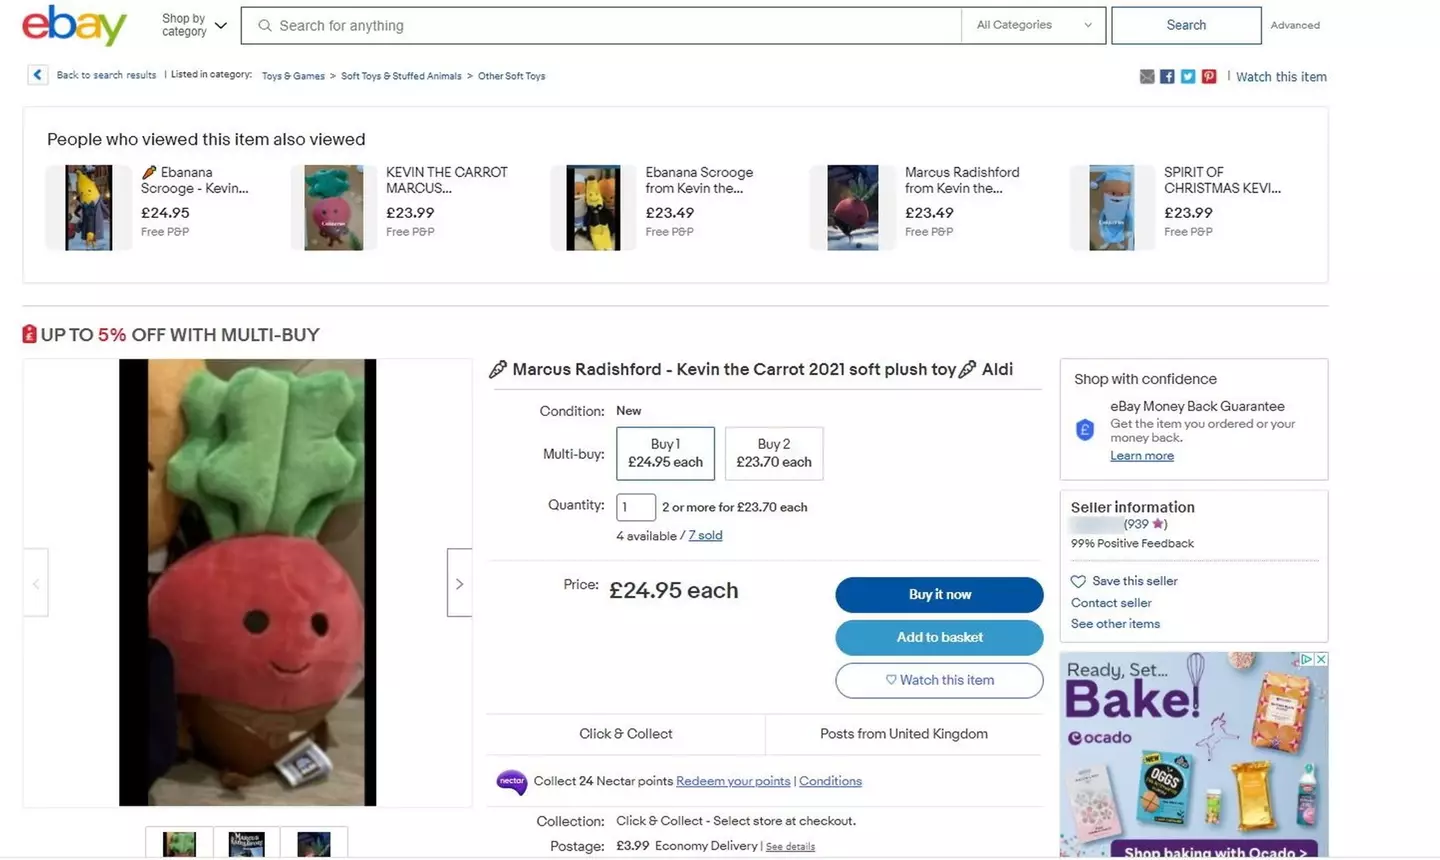 Marcus Radishford toy proceeds from Aldi are meant to go to charity (